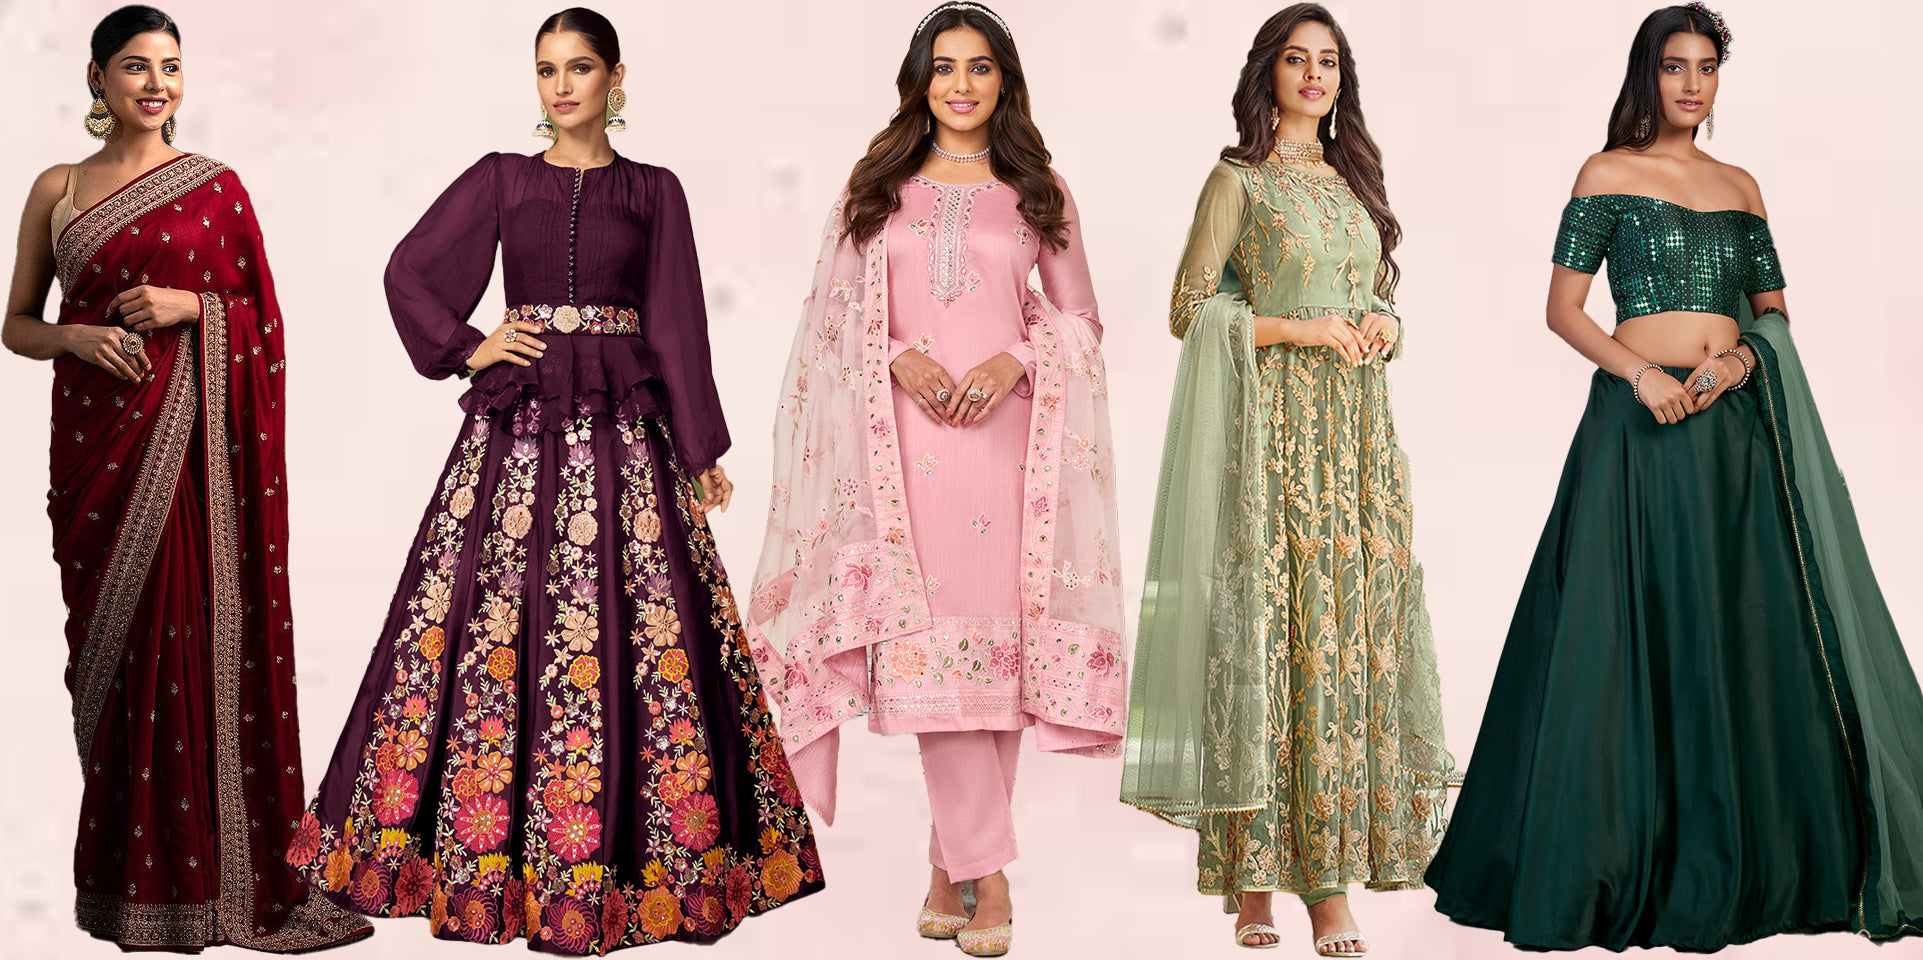 Organza - Gowns - Collection of Indian Dresses, Accessories & Clothing in  Ethnic Fashion